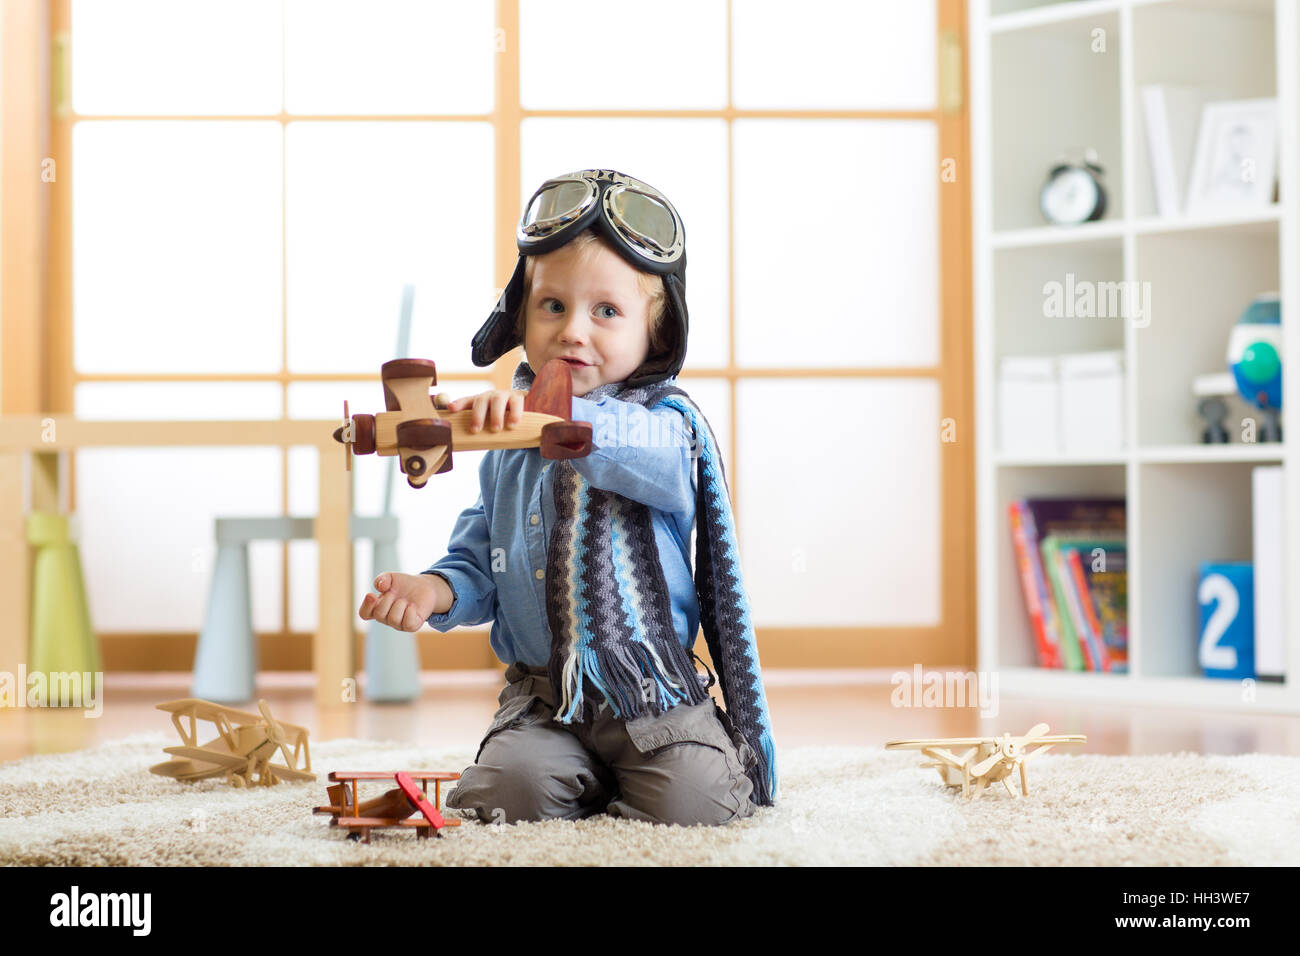 Child dressed like pilot aviator plays with a toy airplanes at home on floor in his room Stock Photo